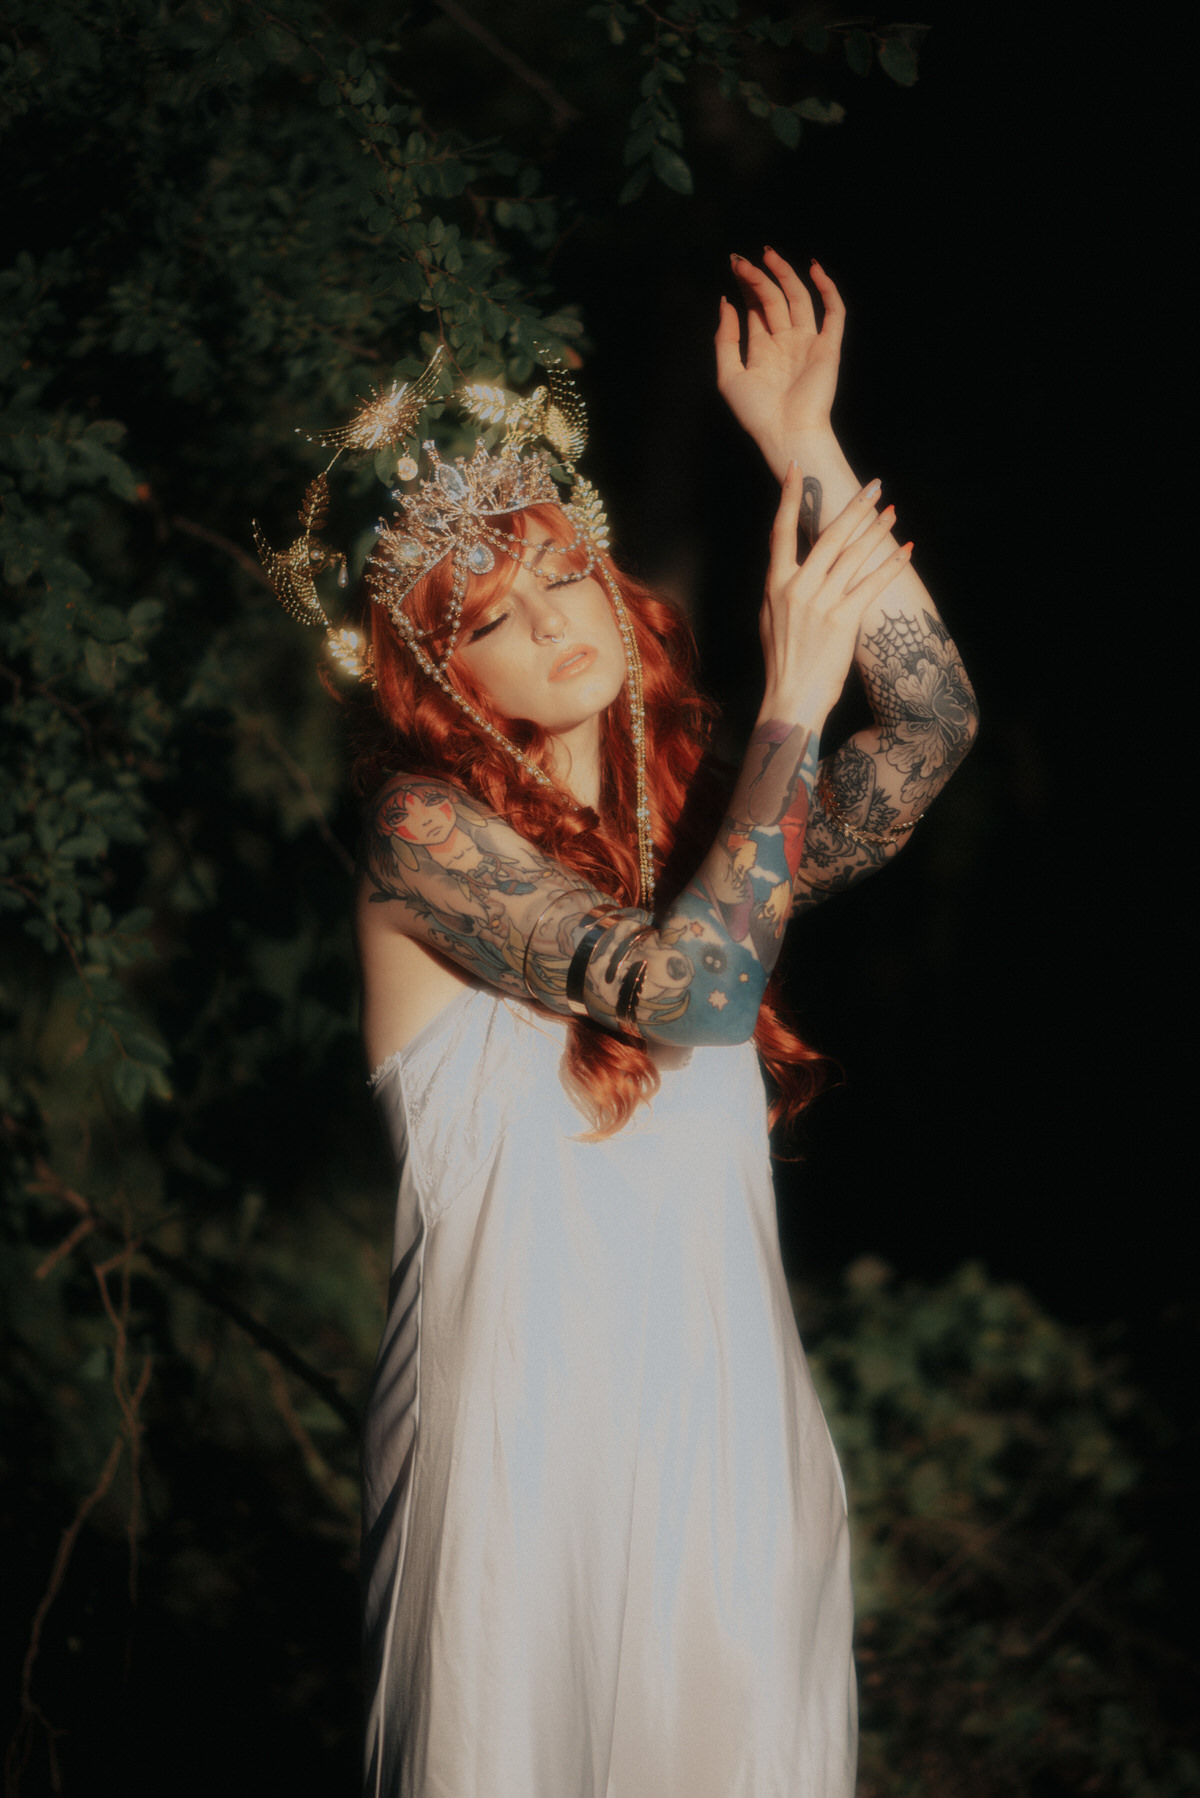 Beautiful model with tattoos and red hair wearing a white slip dress in the sunlight.